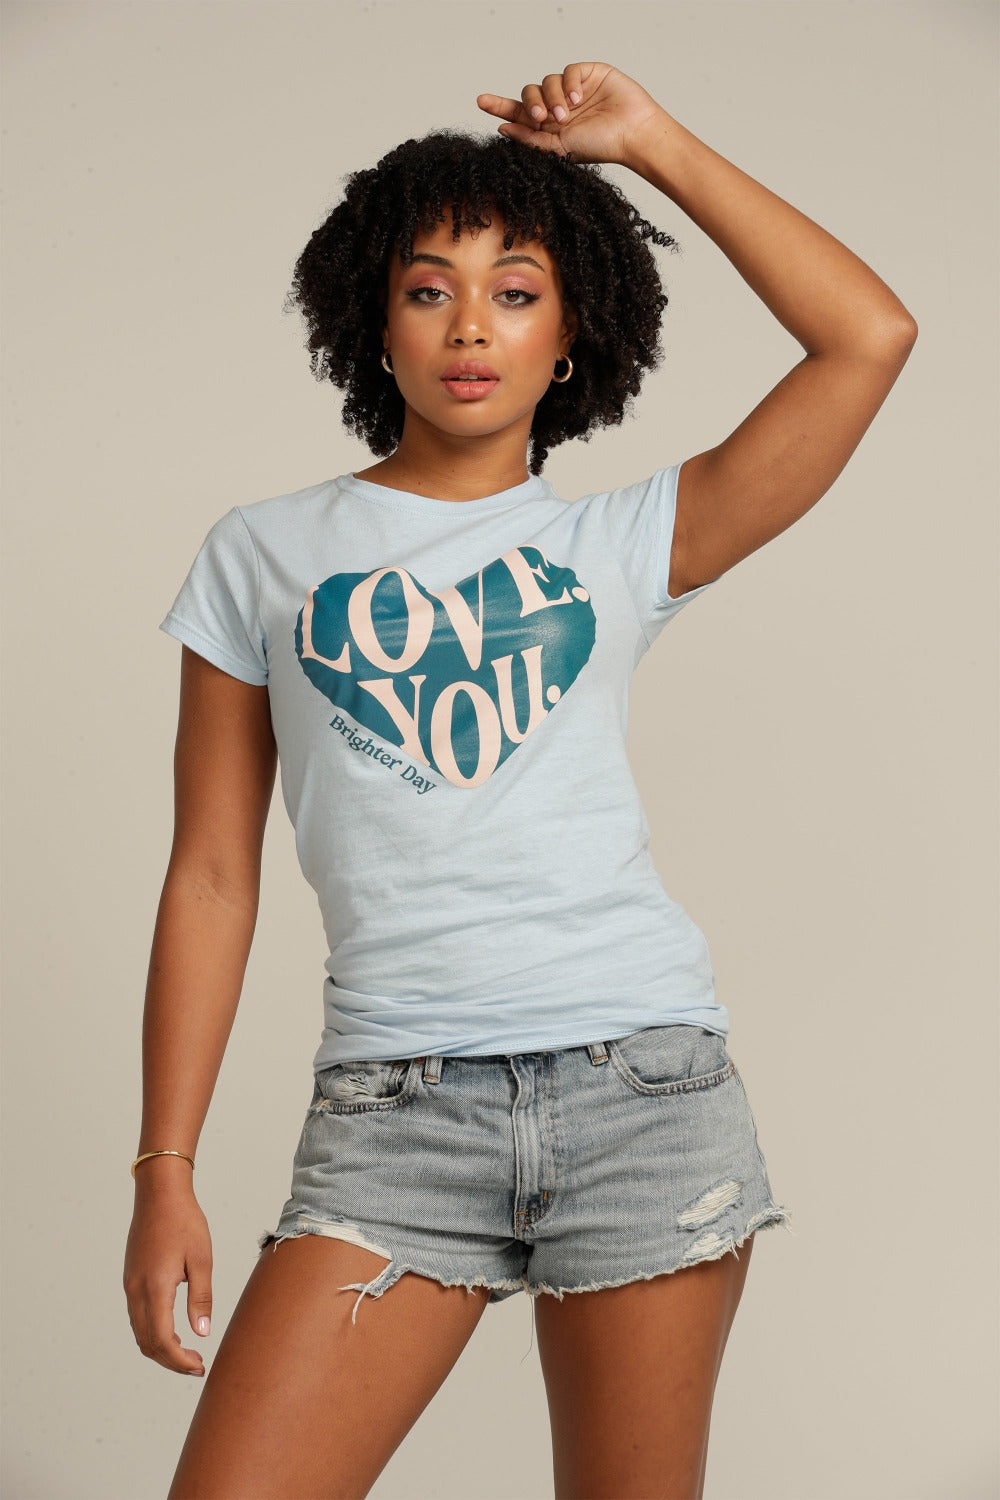 Curly haired woman wears blue LOVE YOU fitted tee shirt